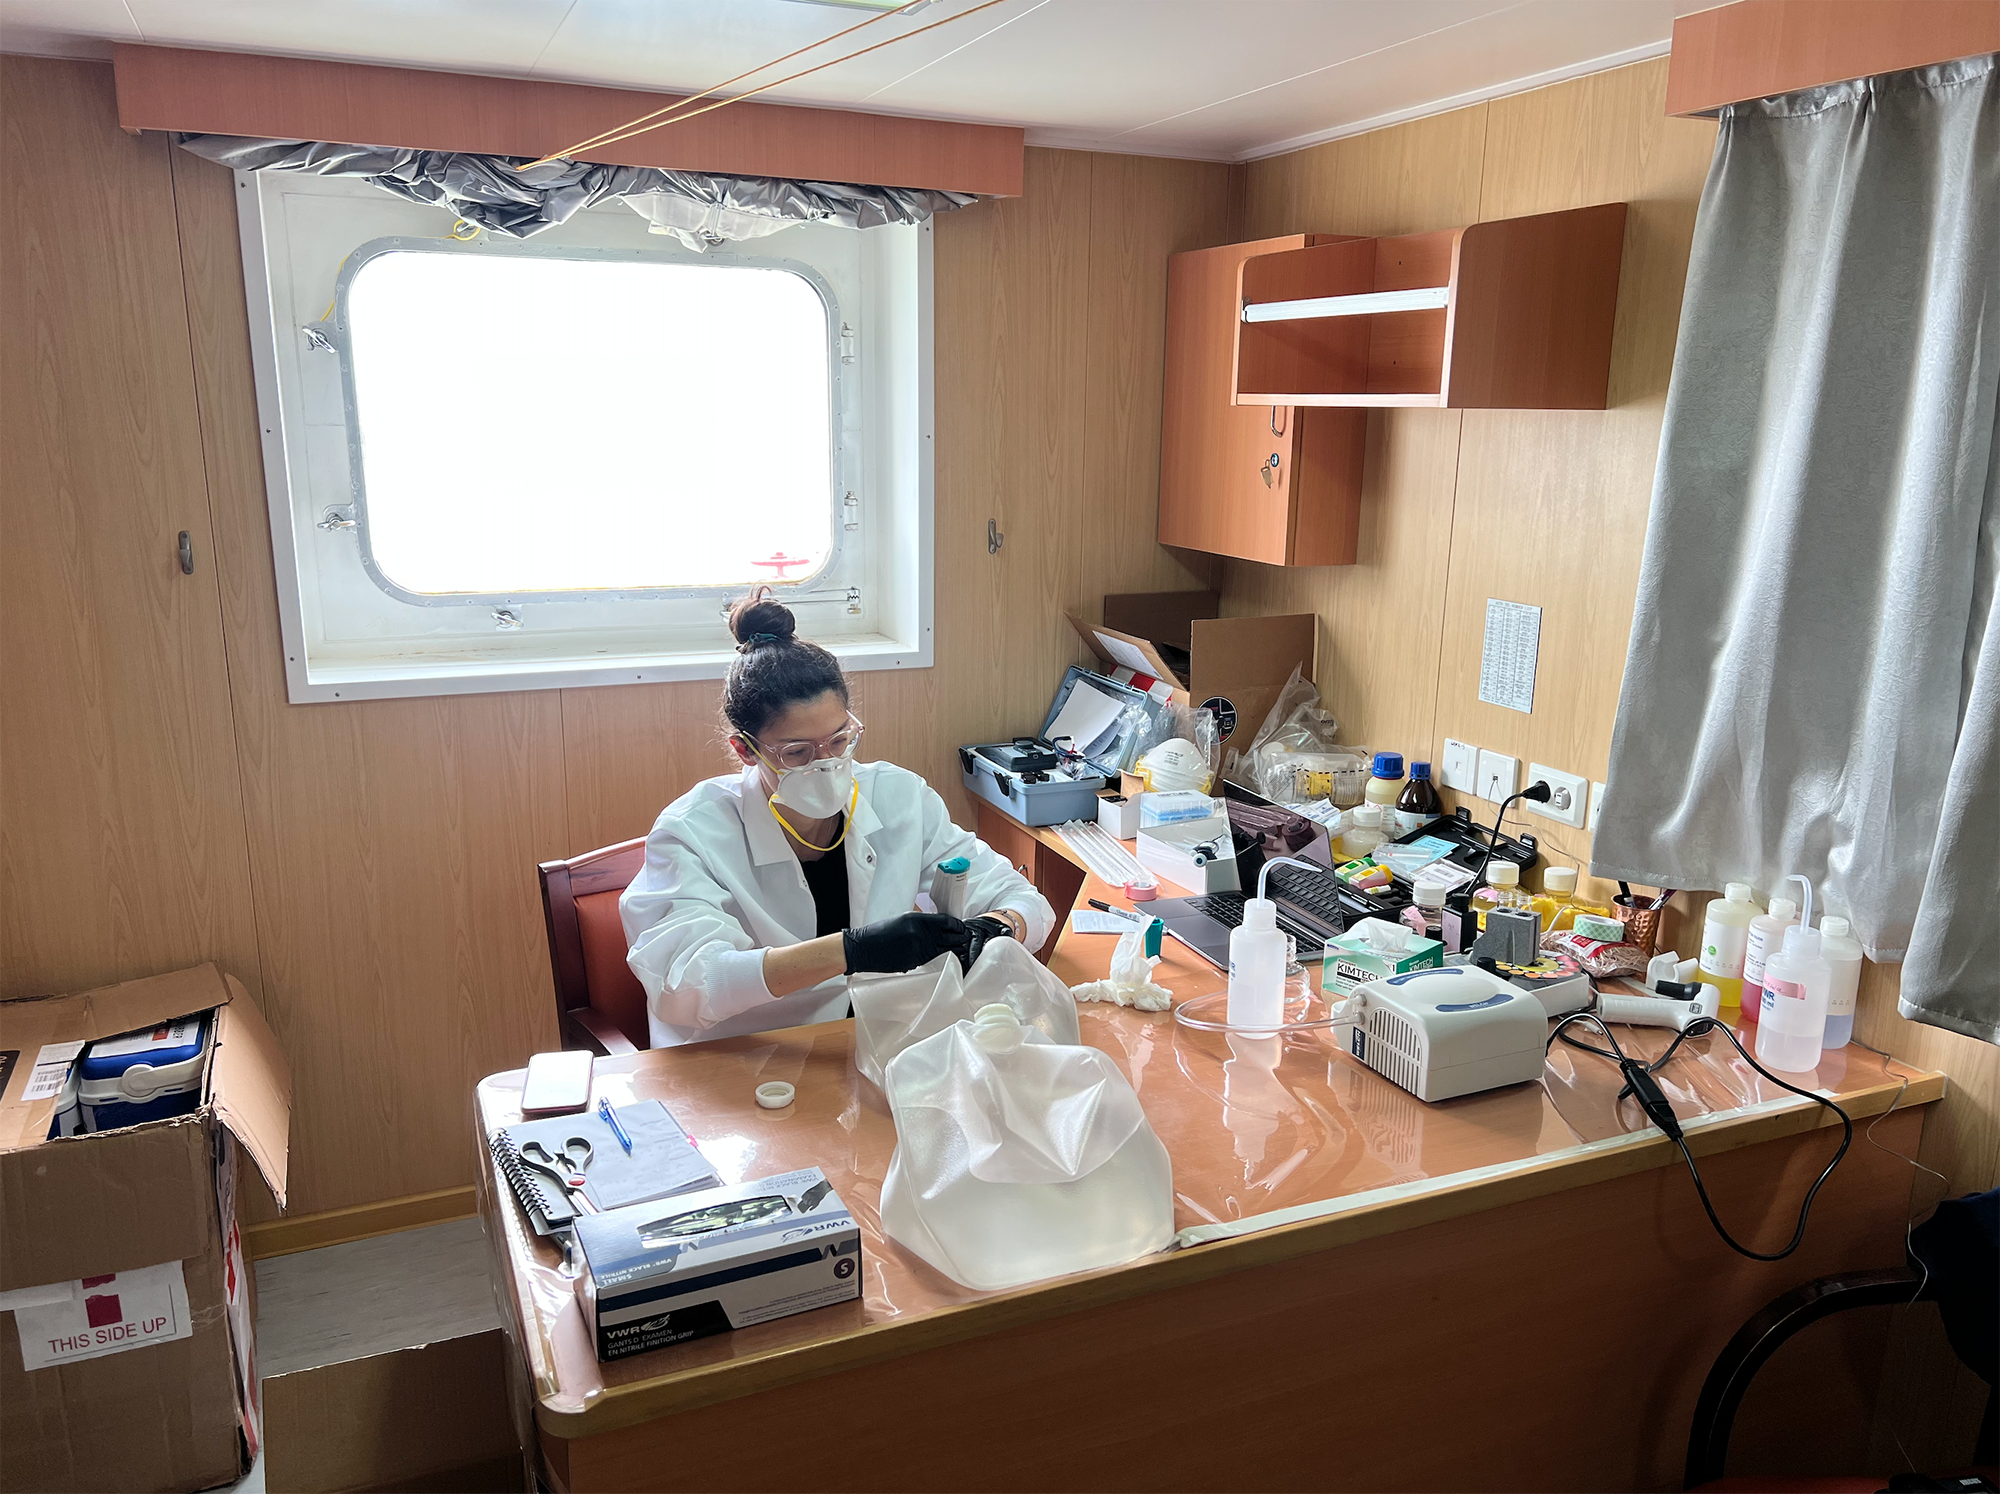 A woman in a lab coat sits at a desk in a ship cabin. She is surrounded by bottles and scientific measurema